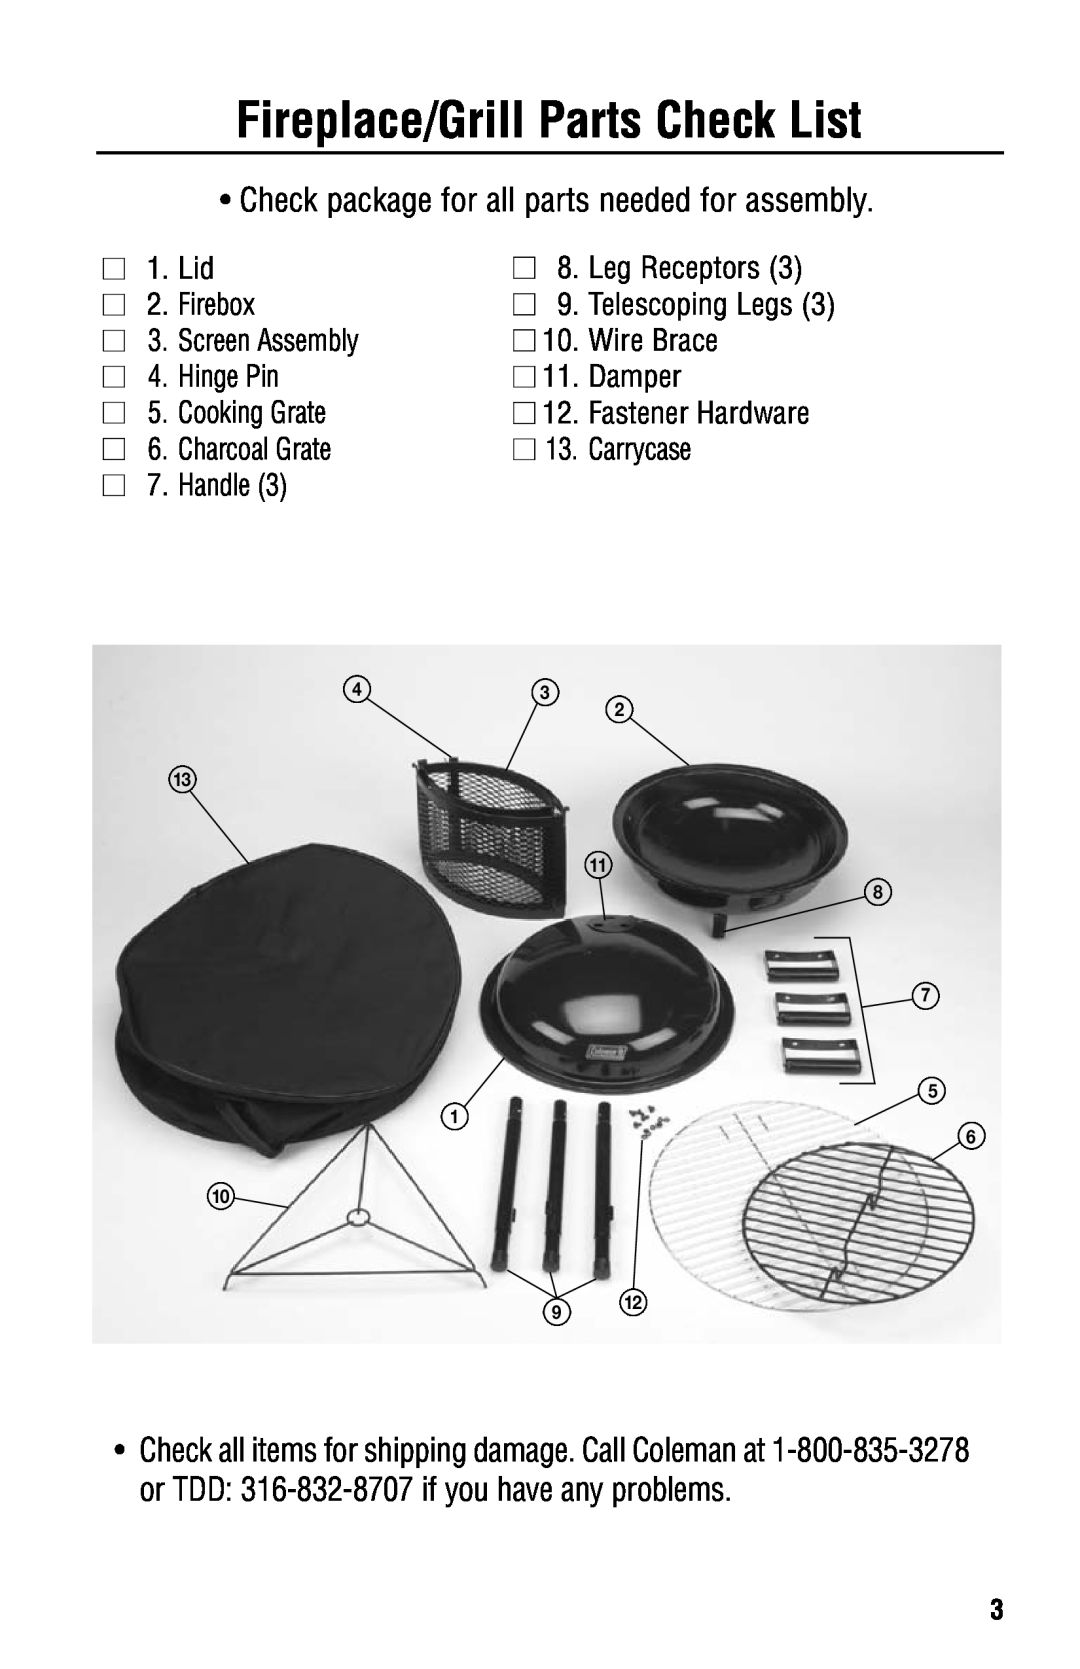 Coleman 5065-705 instruction manual Fireplace/Grill Parts Check List, Check package for all parts needed for assembly 